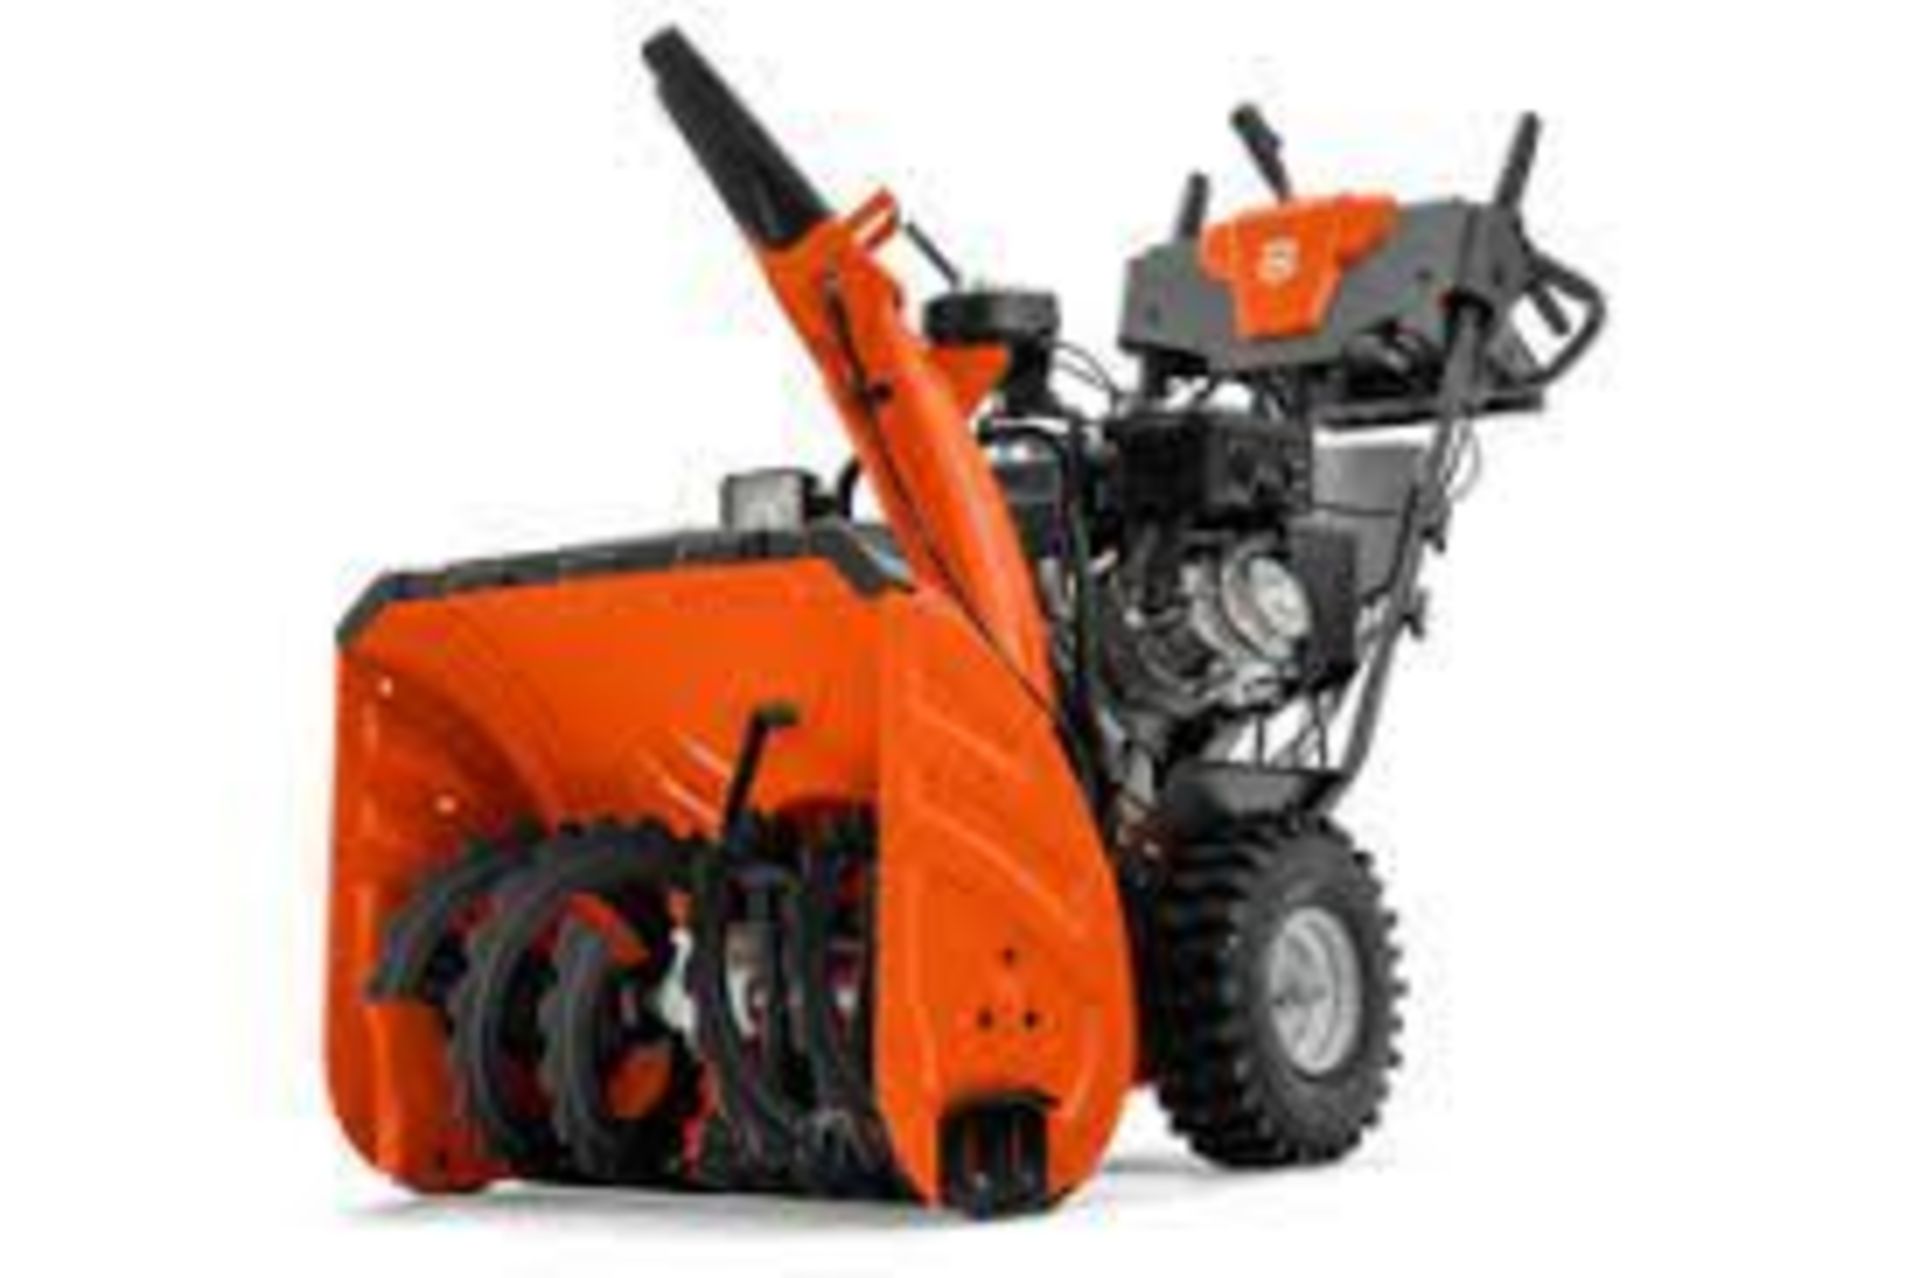 Husqvarna ST 427 Self Propelled Snow Blower - Approx. MSRP $2399 - Image 2 of 5